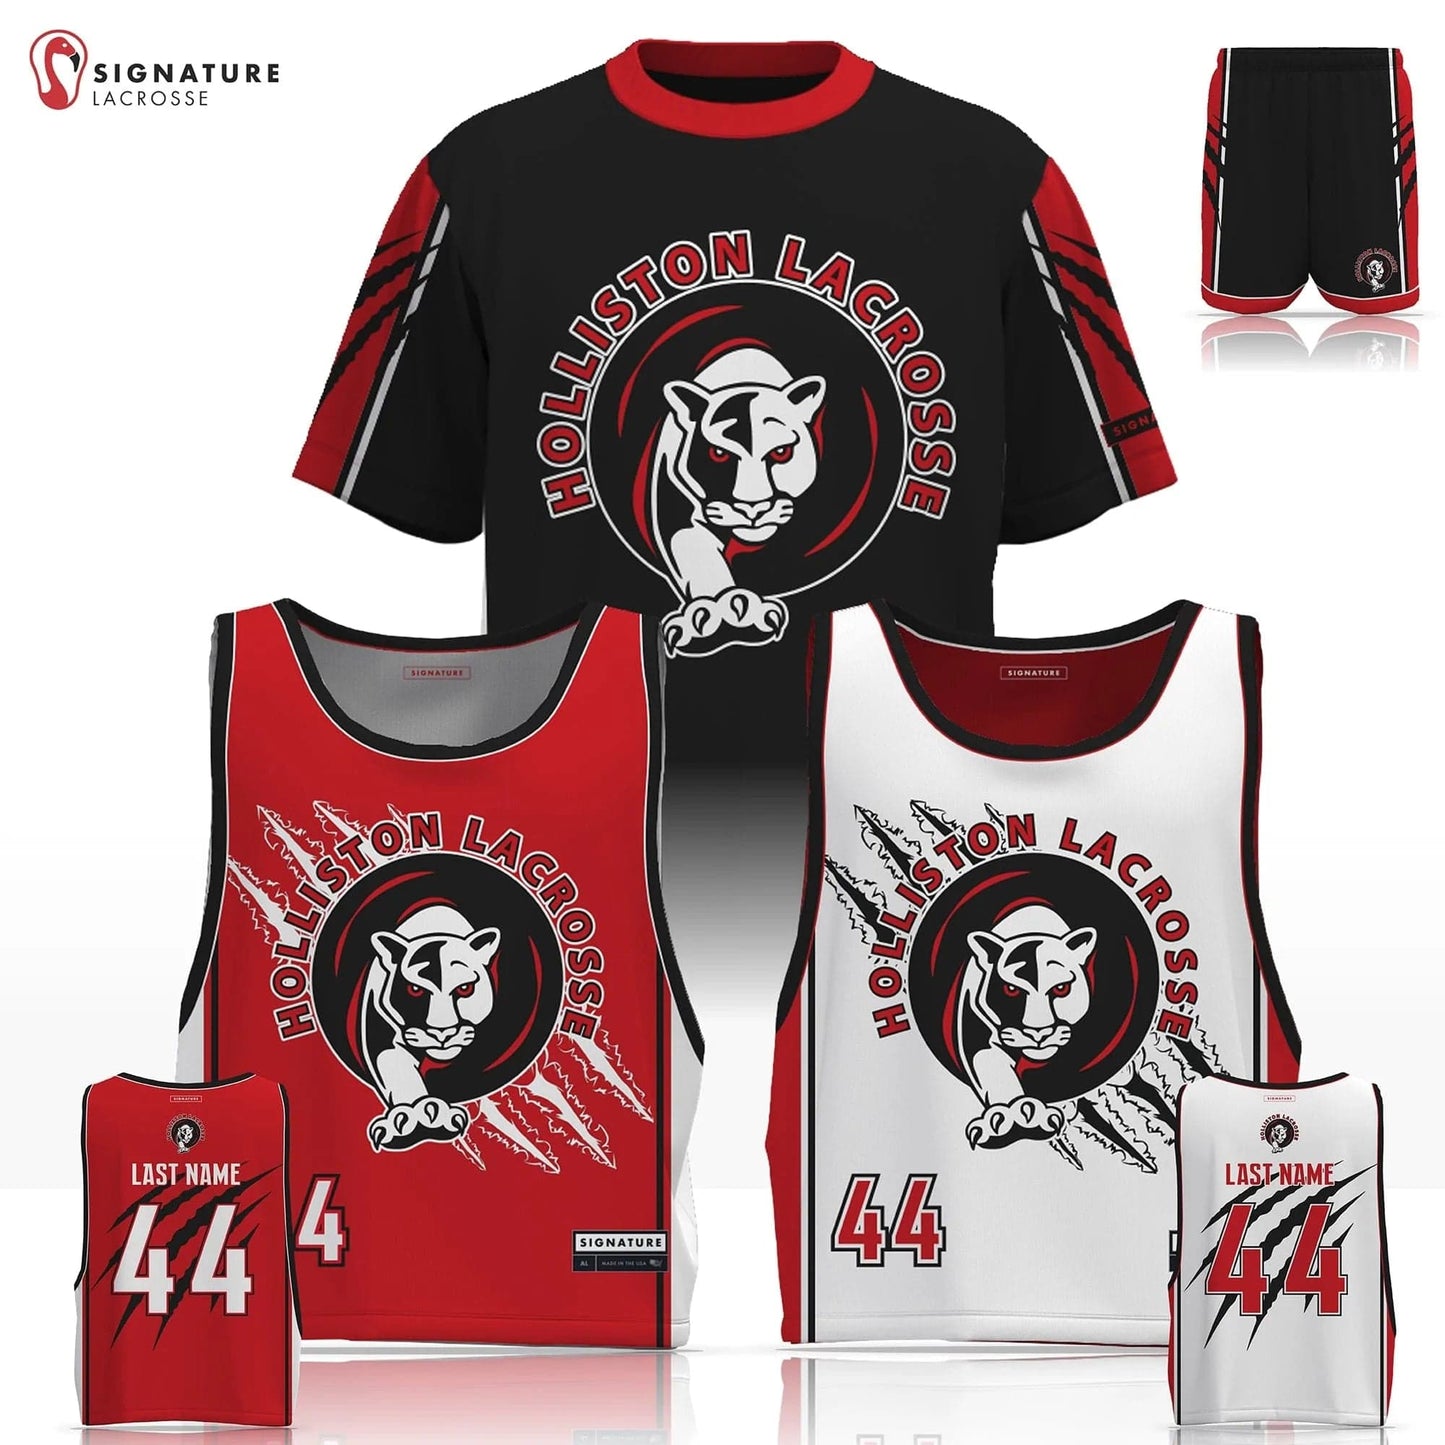 Holliston Youth Lacrosse Men's 3 Piece Player Game Package: Grade K-2 Signature Lacrosse